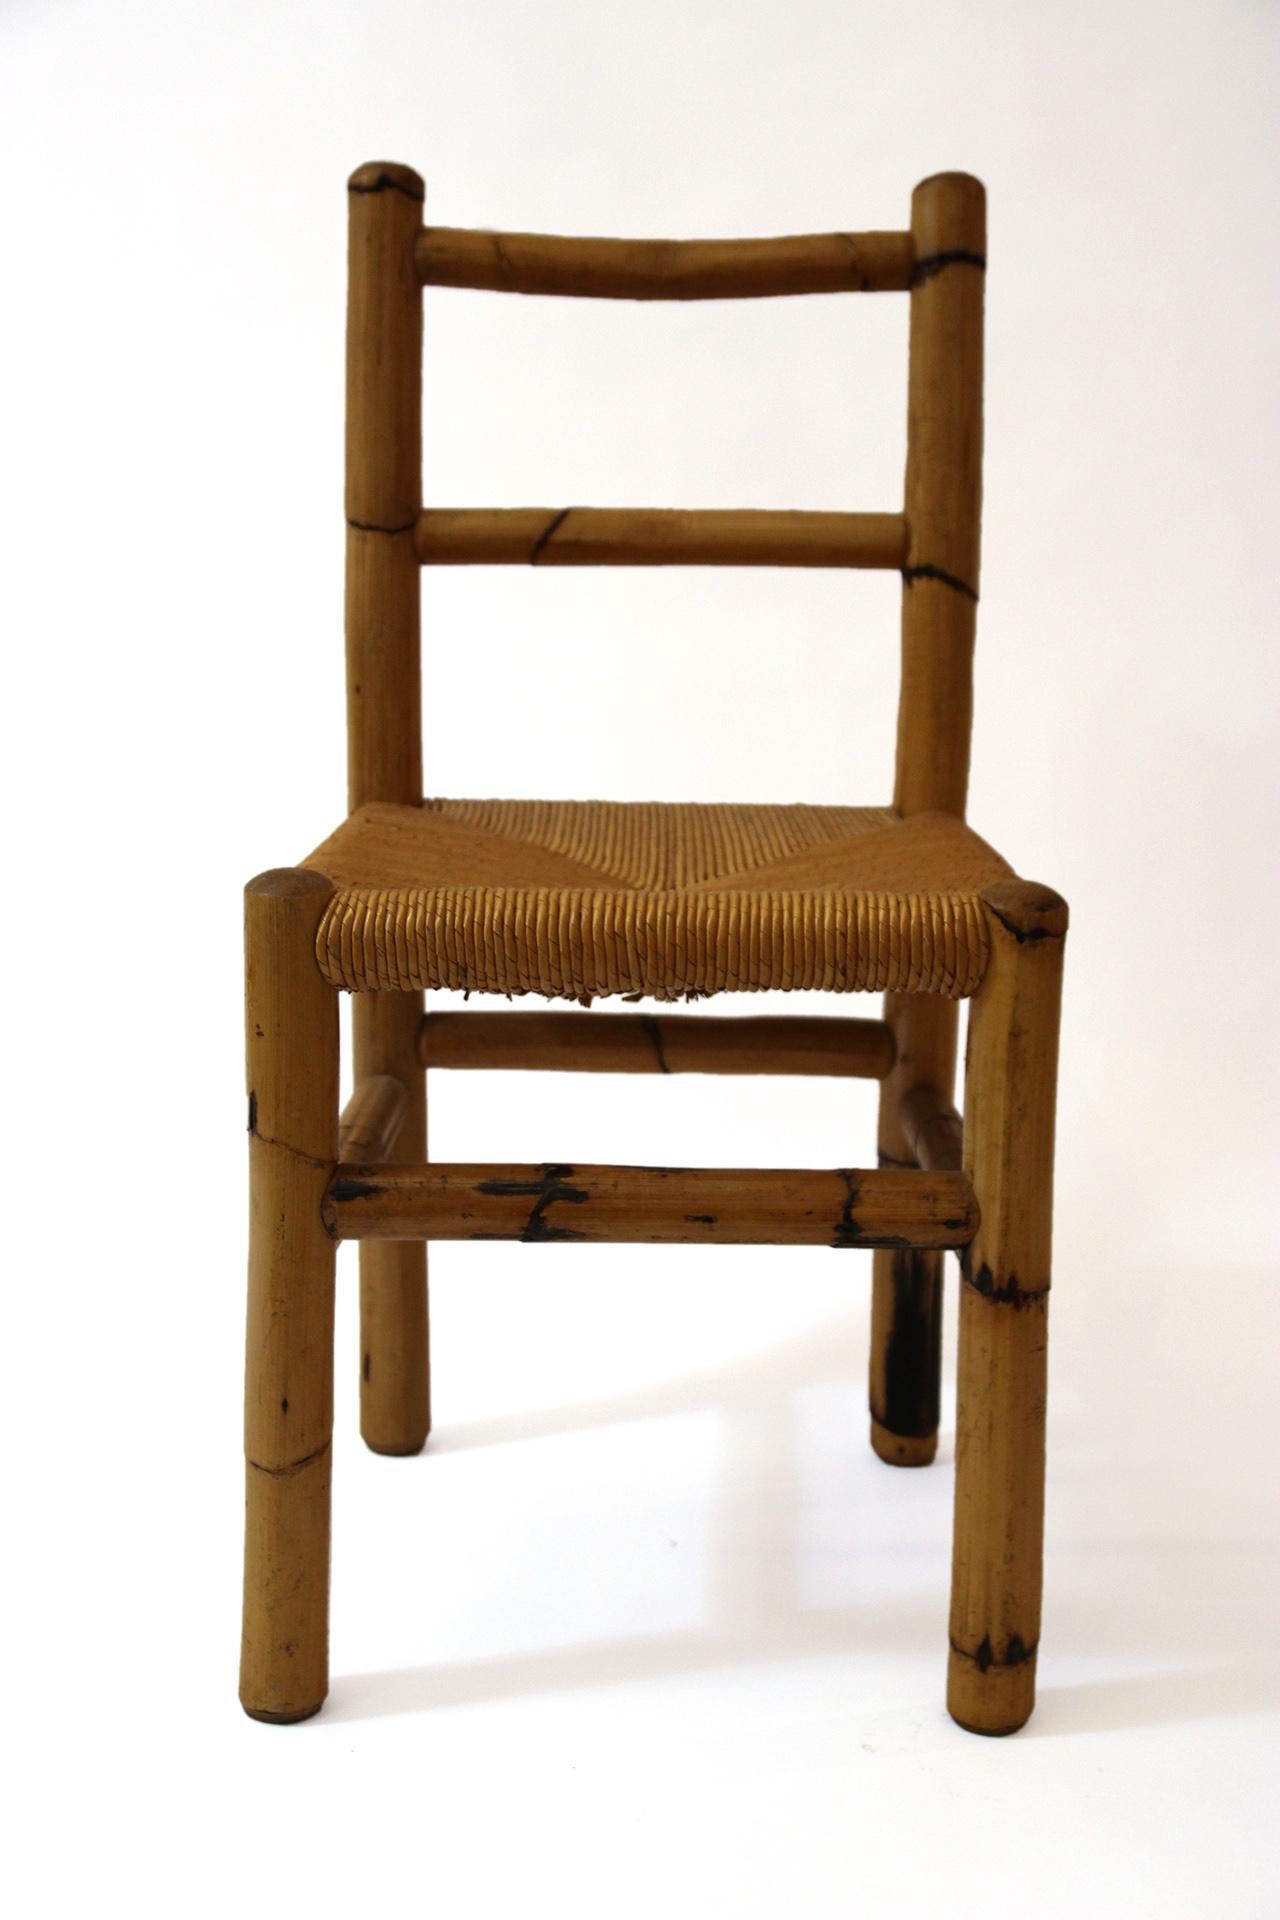 Set of four chairs, 
wood and bamboo, 
circa 1970, France.
Measures: Height 85 cm, seat height 46 cm, width 41 cm, depth 40 cm.